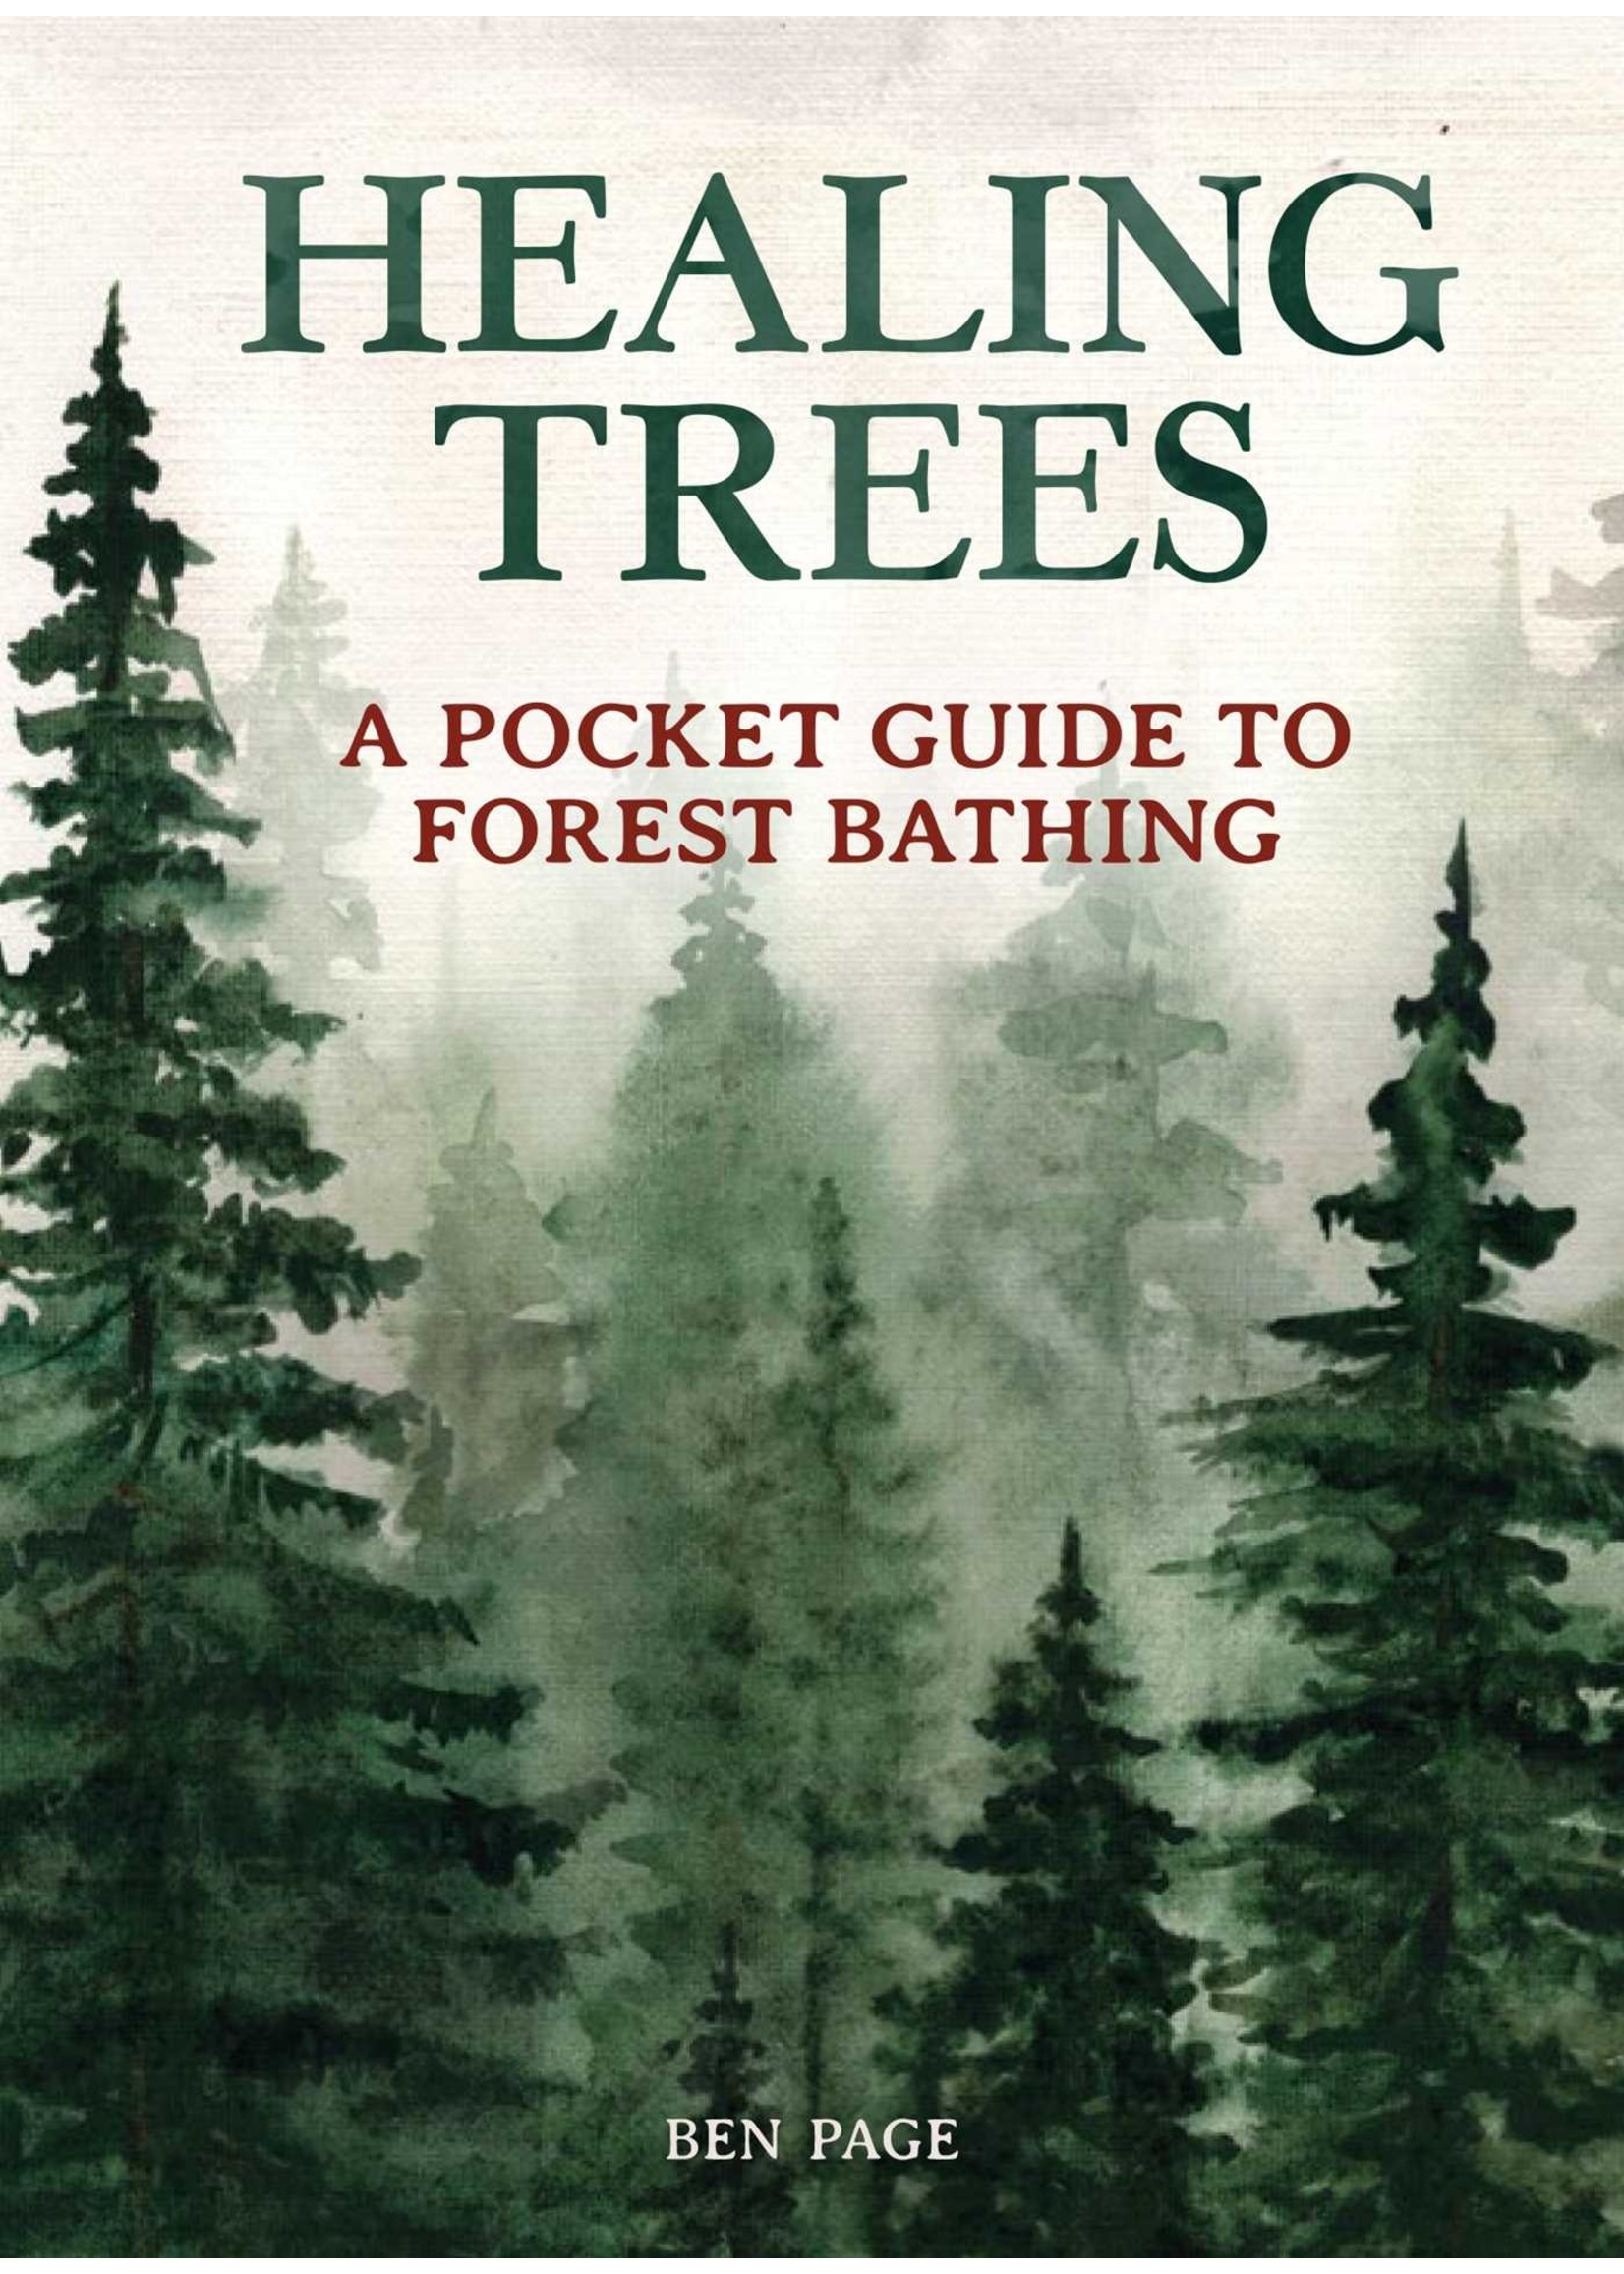 Healing Trees: A Pocket Guide to Forest Bathing by Ben Page